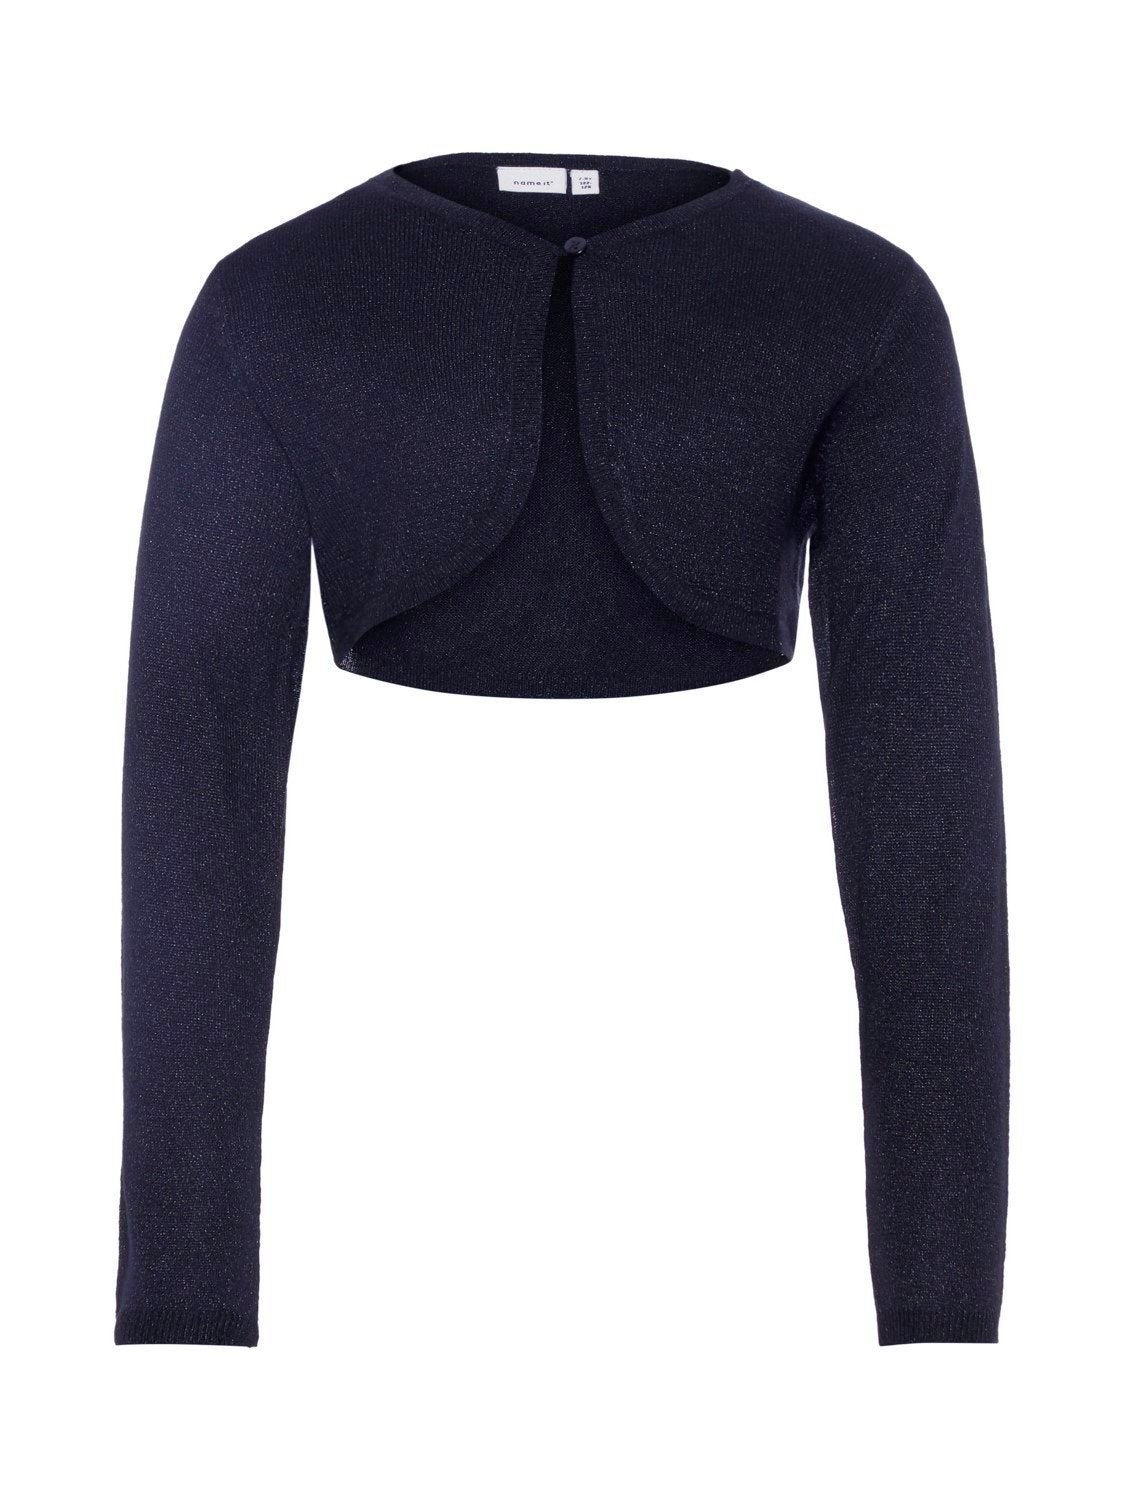 Name it Girls Long Sleeved Knitted Bolero in Navy FRONT